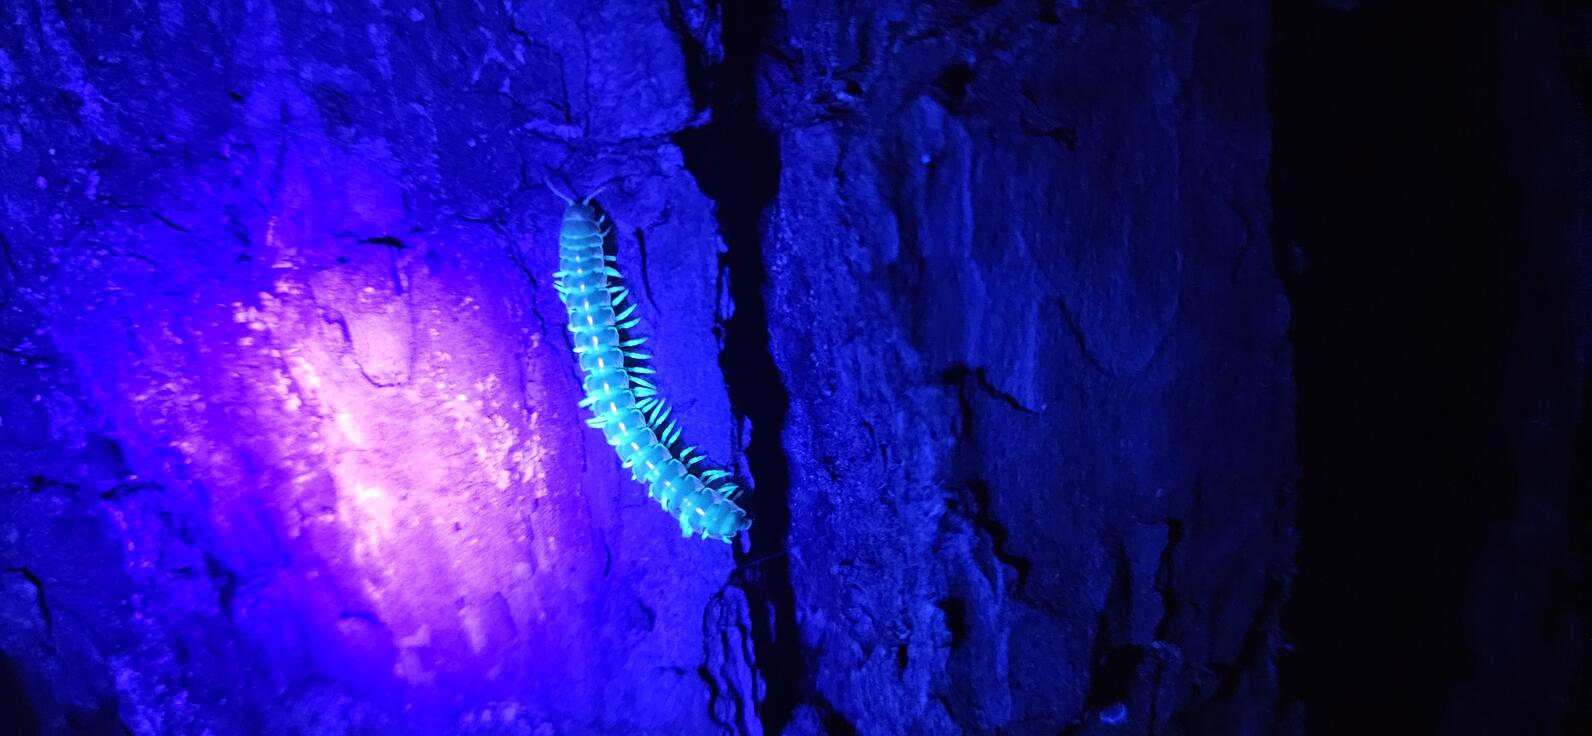 A millipede is on pine bark, normally it appears a dull brown, but under ultraviolet light it appears bright teal, which something people cannot see on their own.